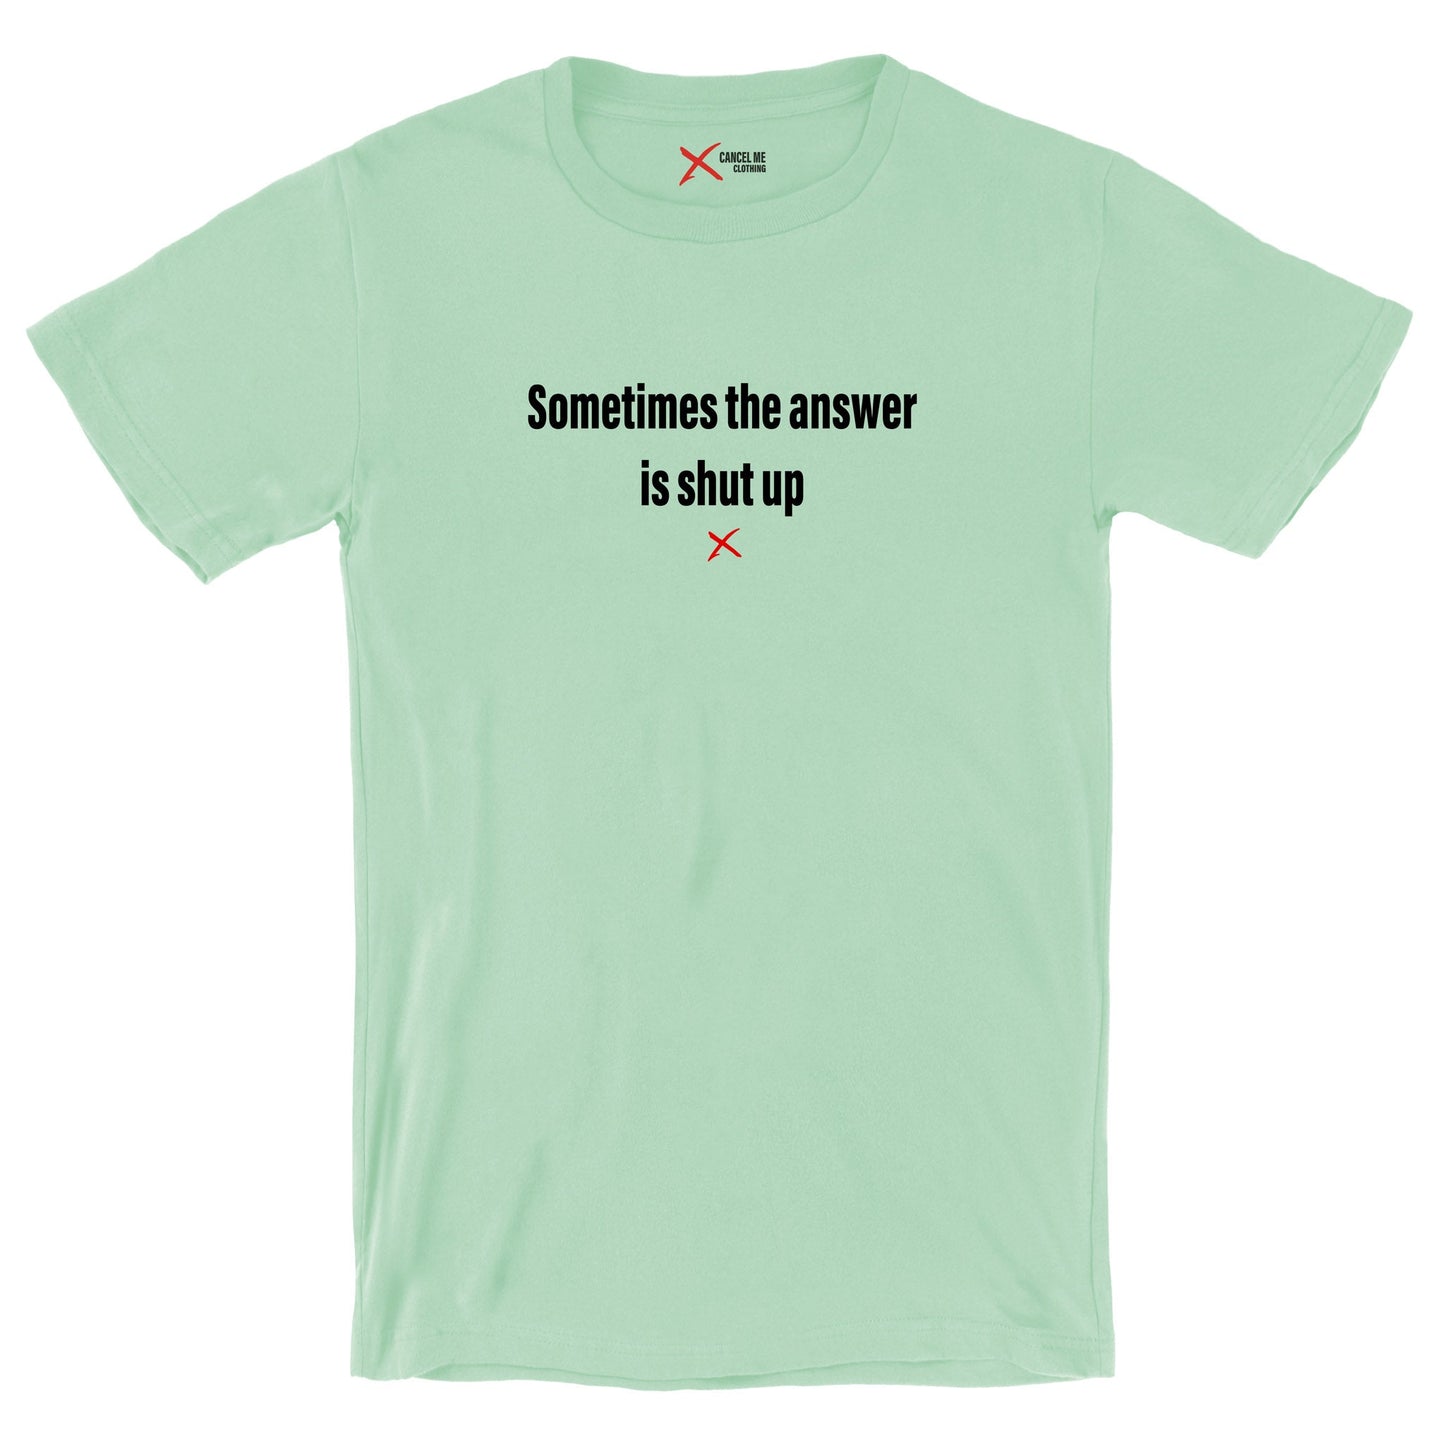 Sometimes the answer is shut up - Shirt